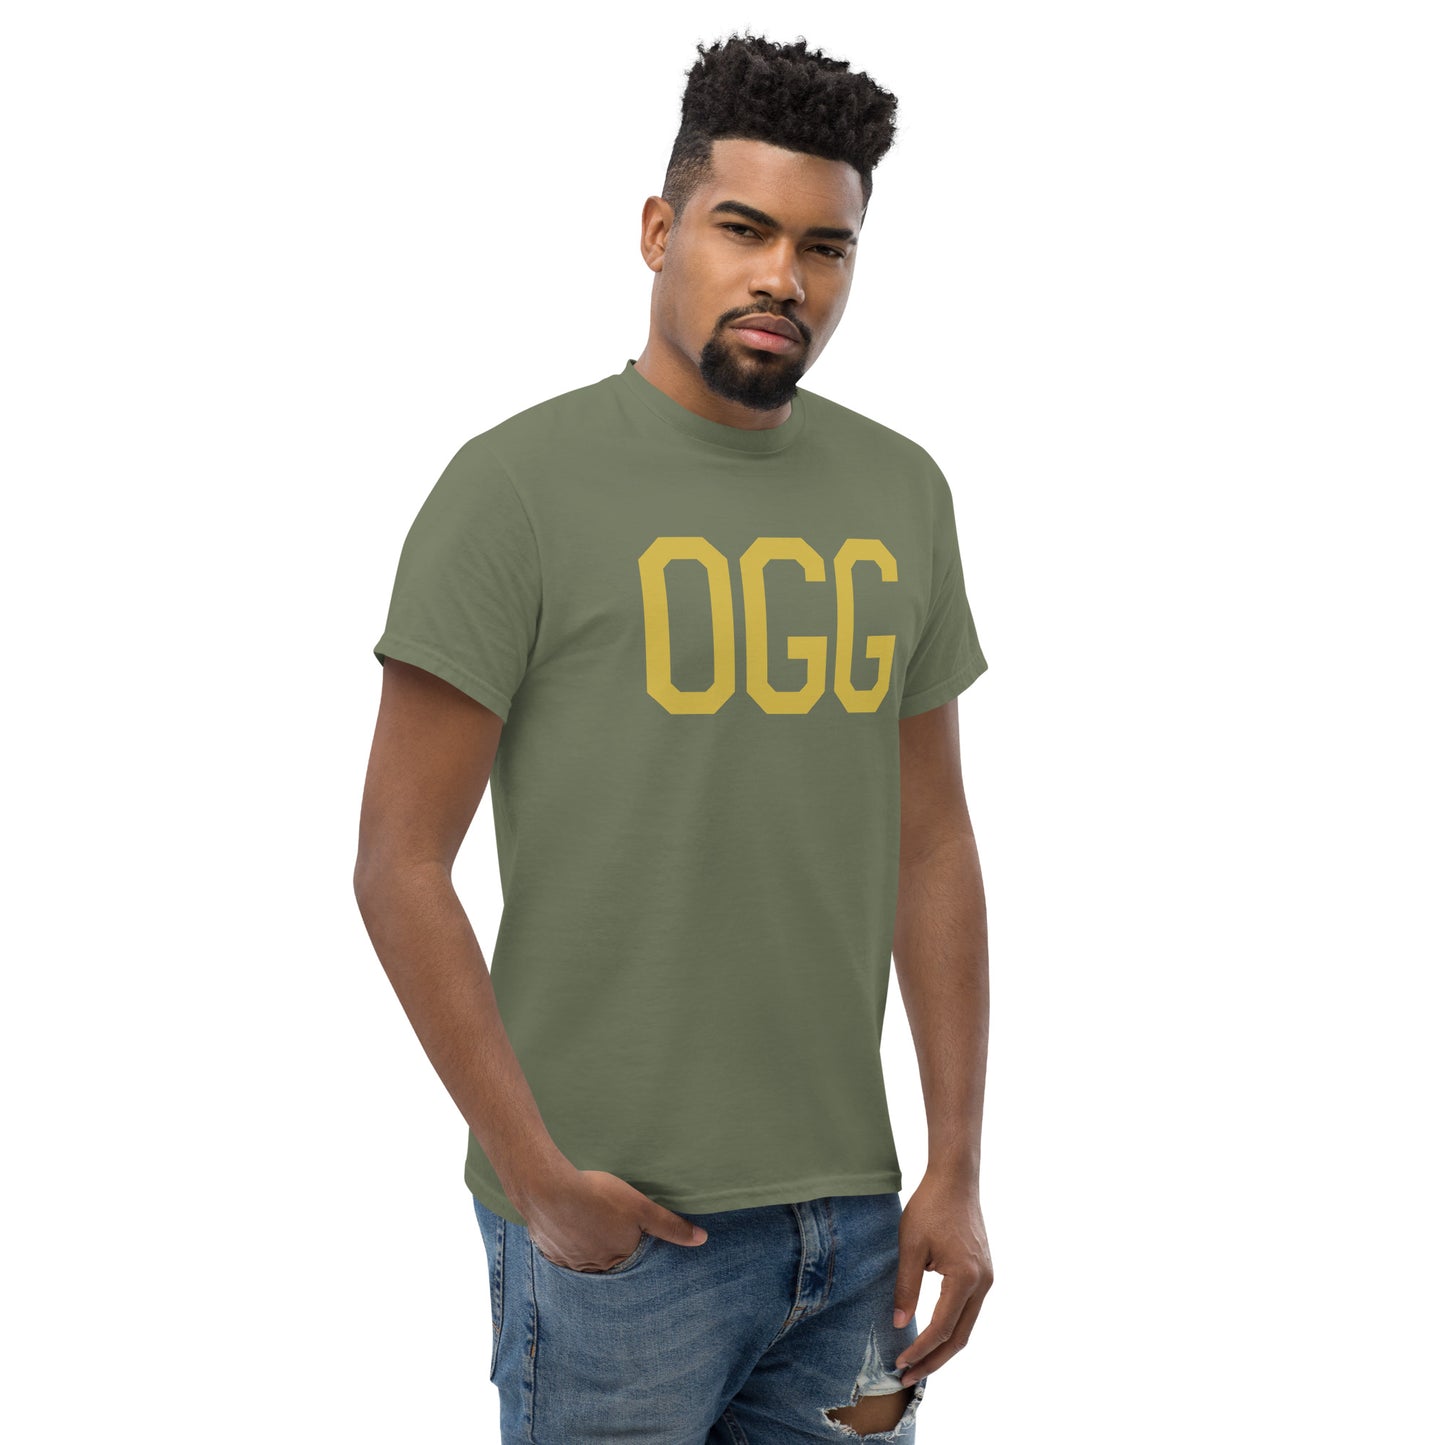 Aviation Enthusiast Men's Tee - Old Gold Graphic • OGG Maui • YHM Designs - Image 08